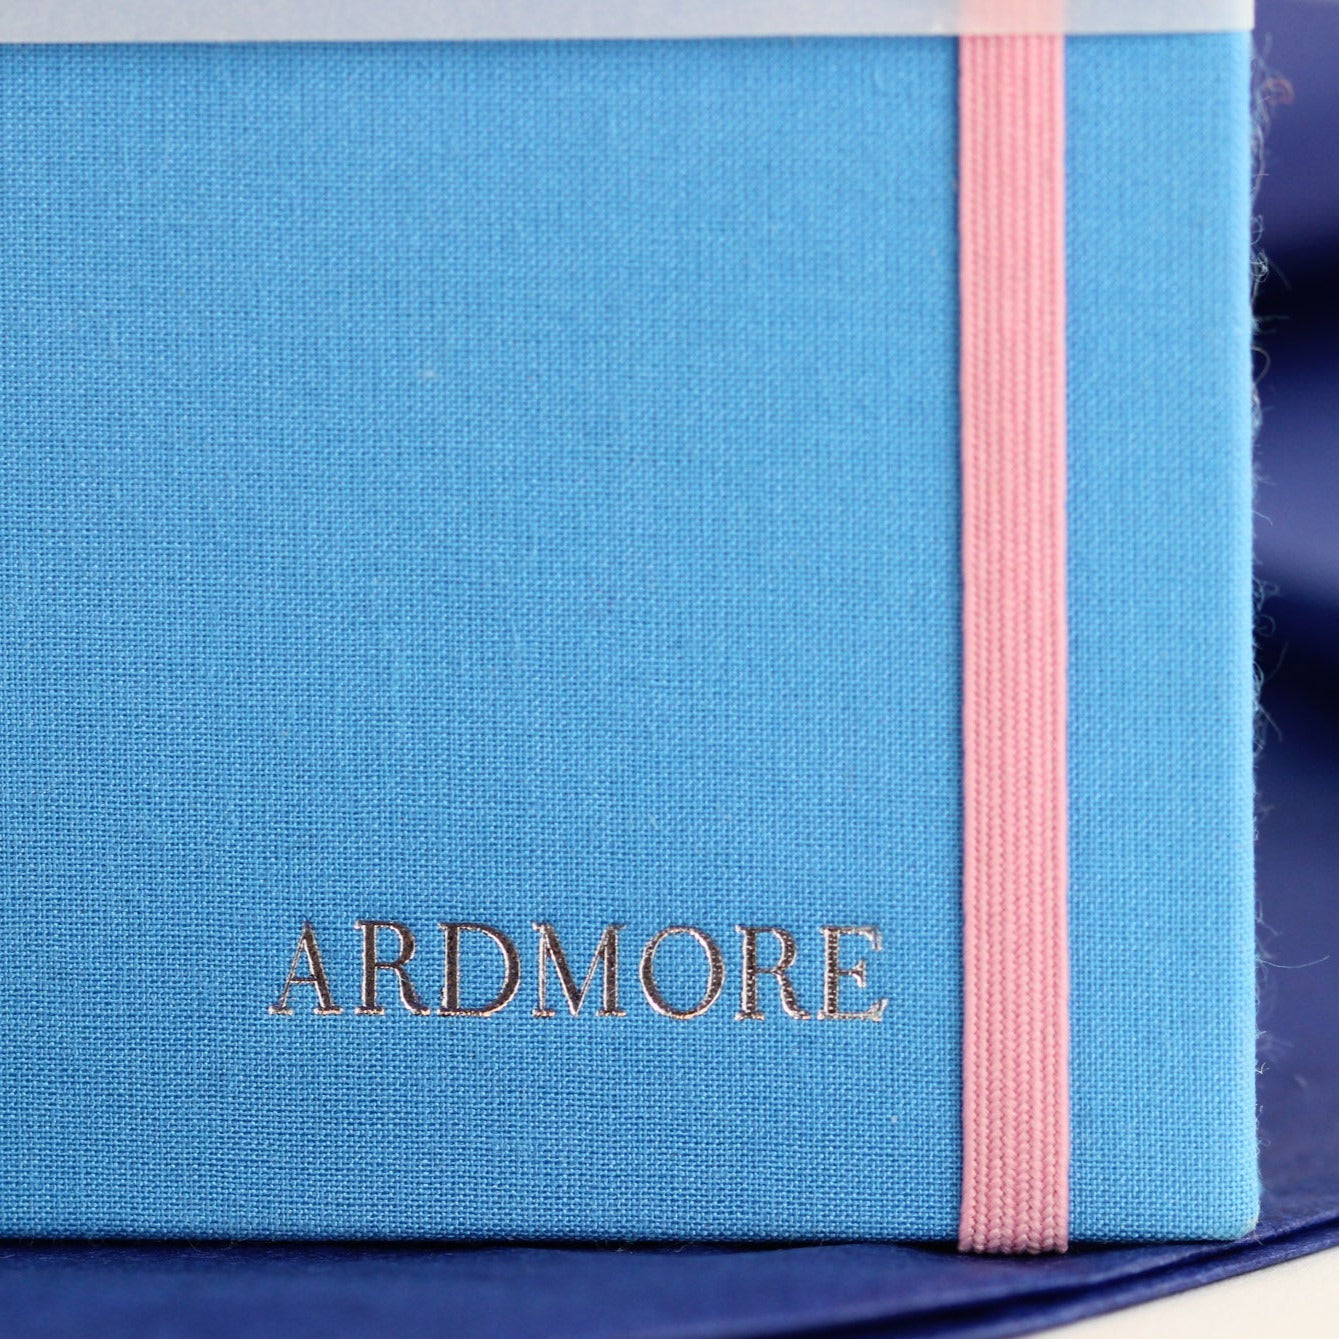 Simply Ardmore Gift Box